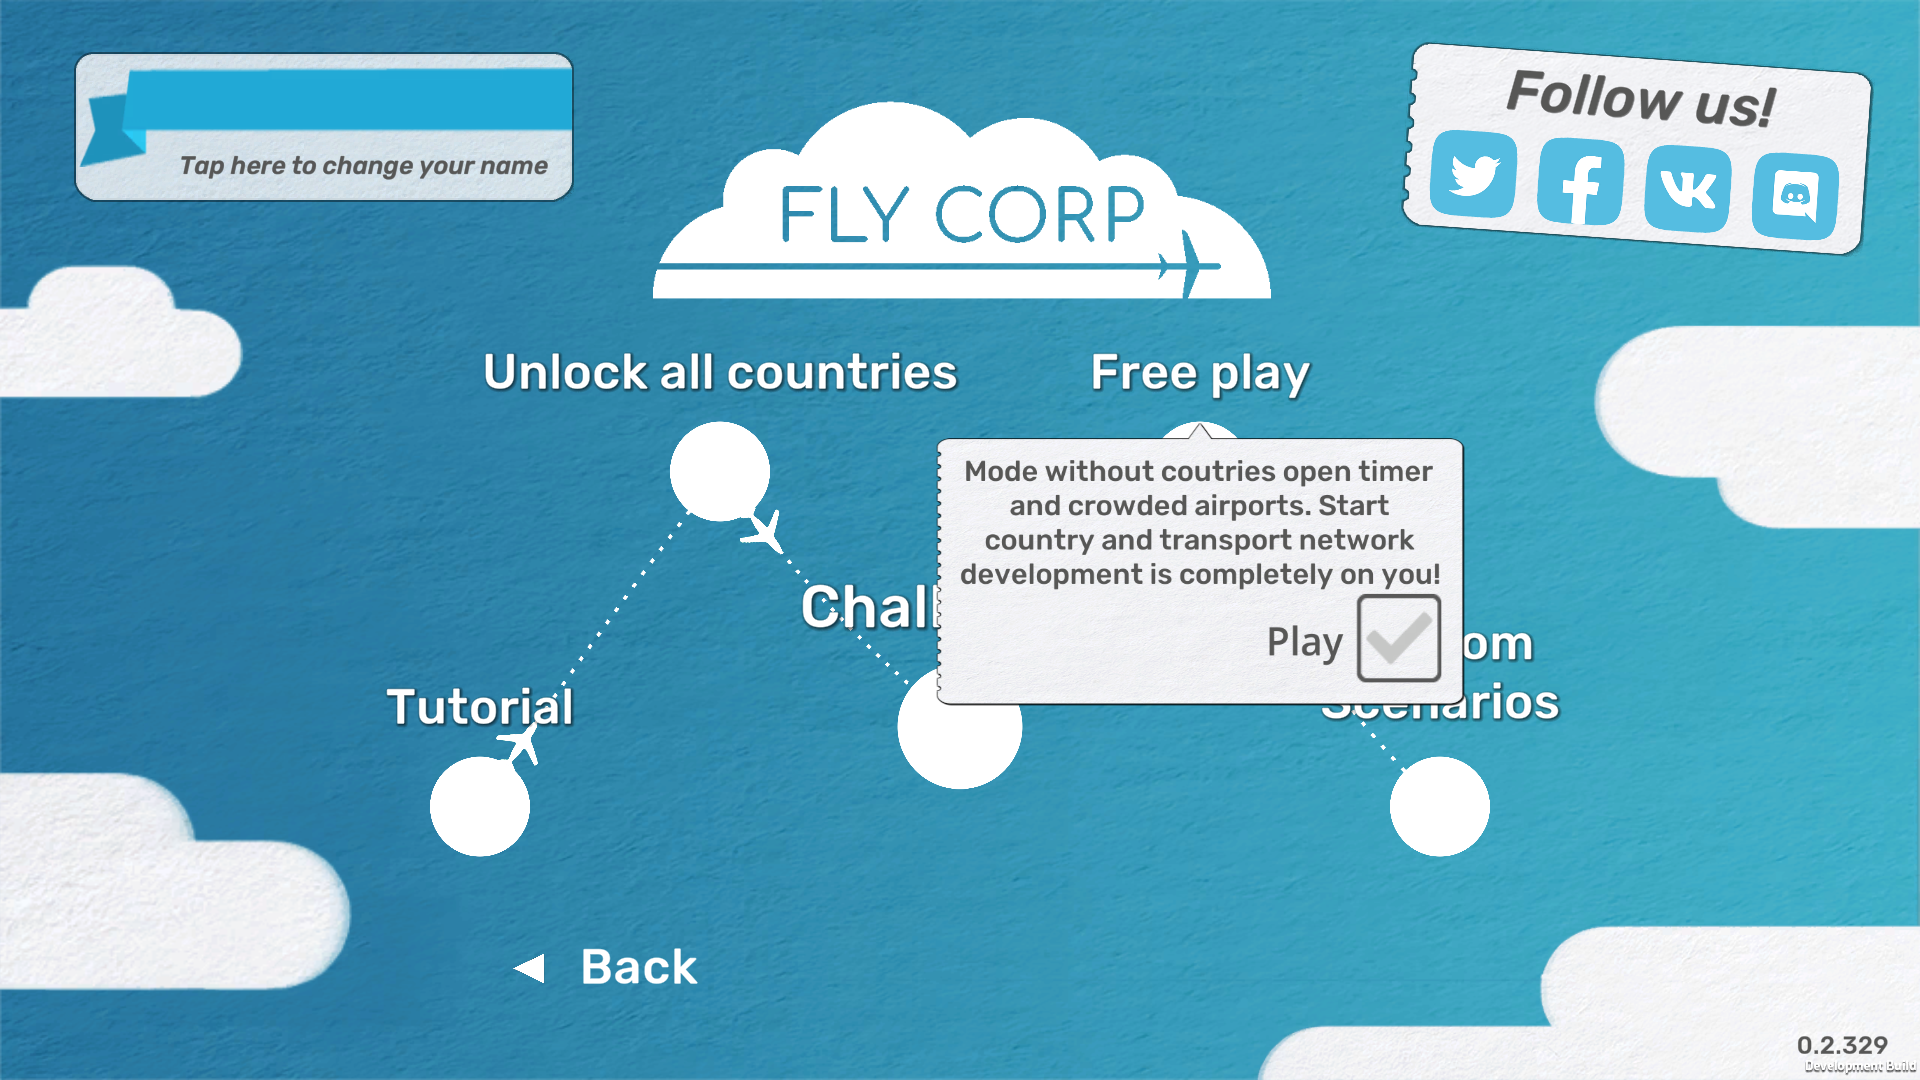 Be a fly game. Fly Corp. Fly Corp игра. Игра похожая на Fly Corp. Fly Corp города.